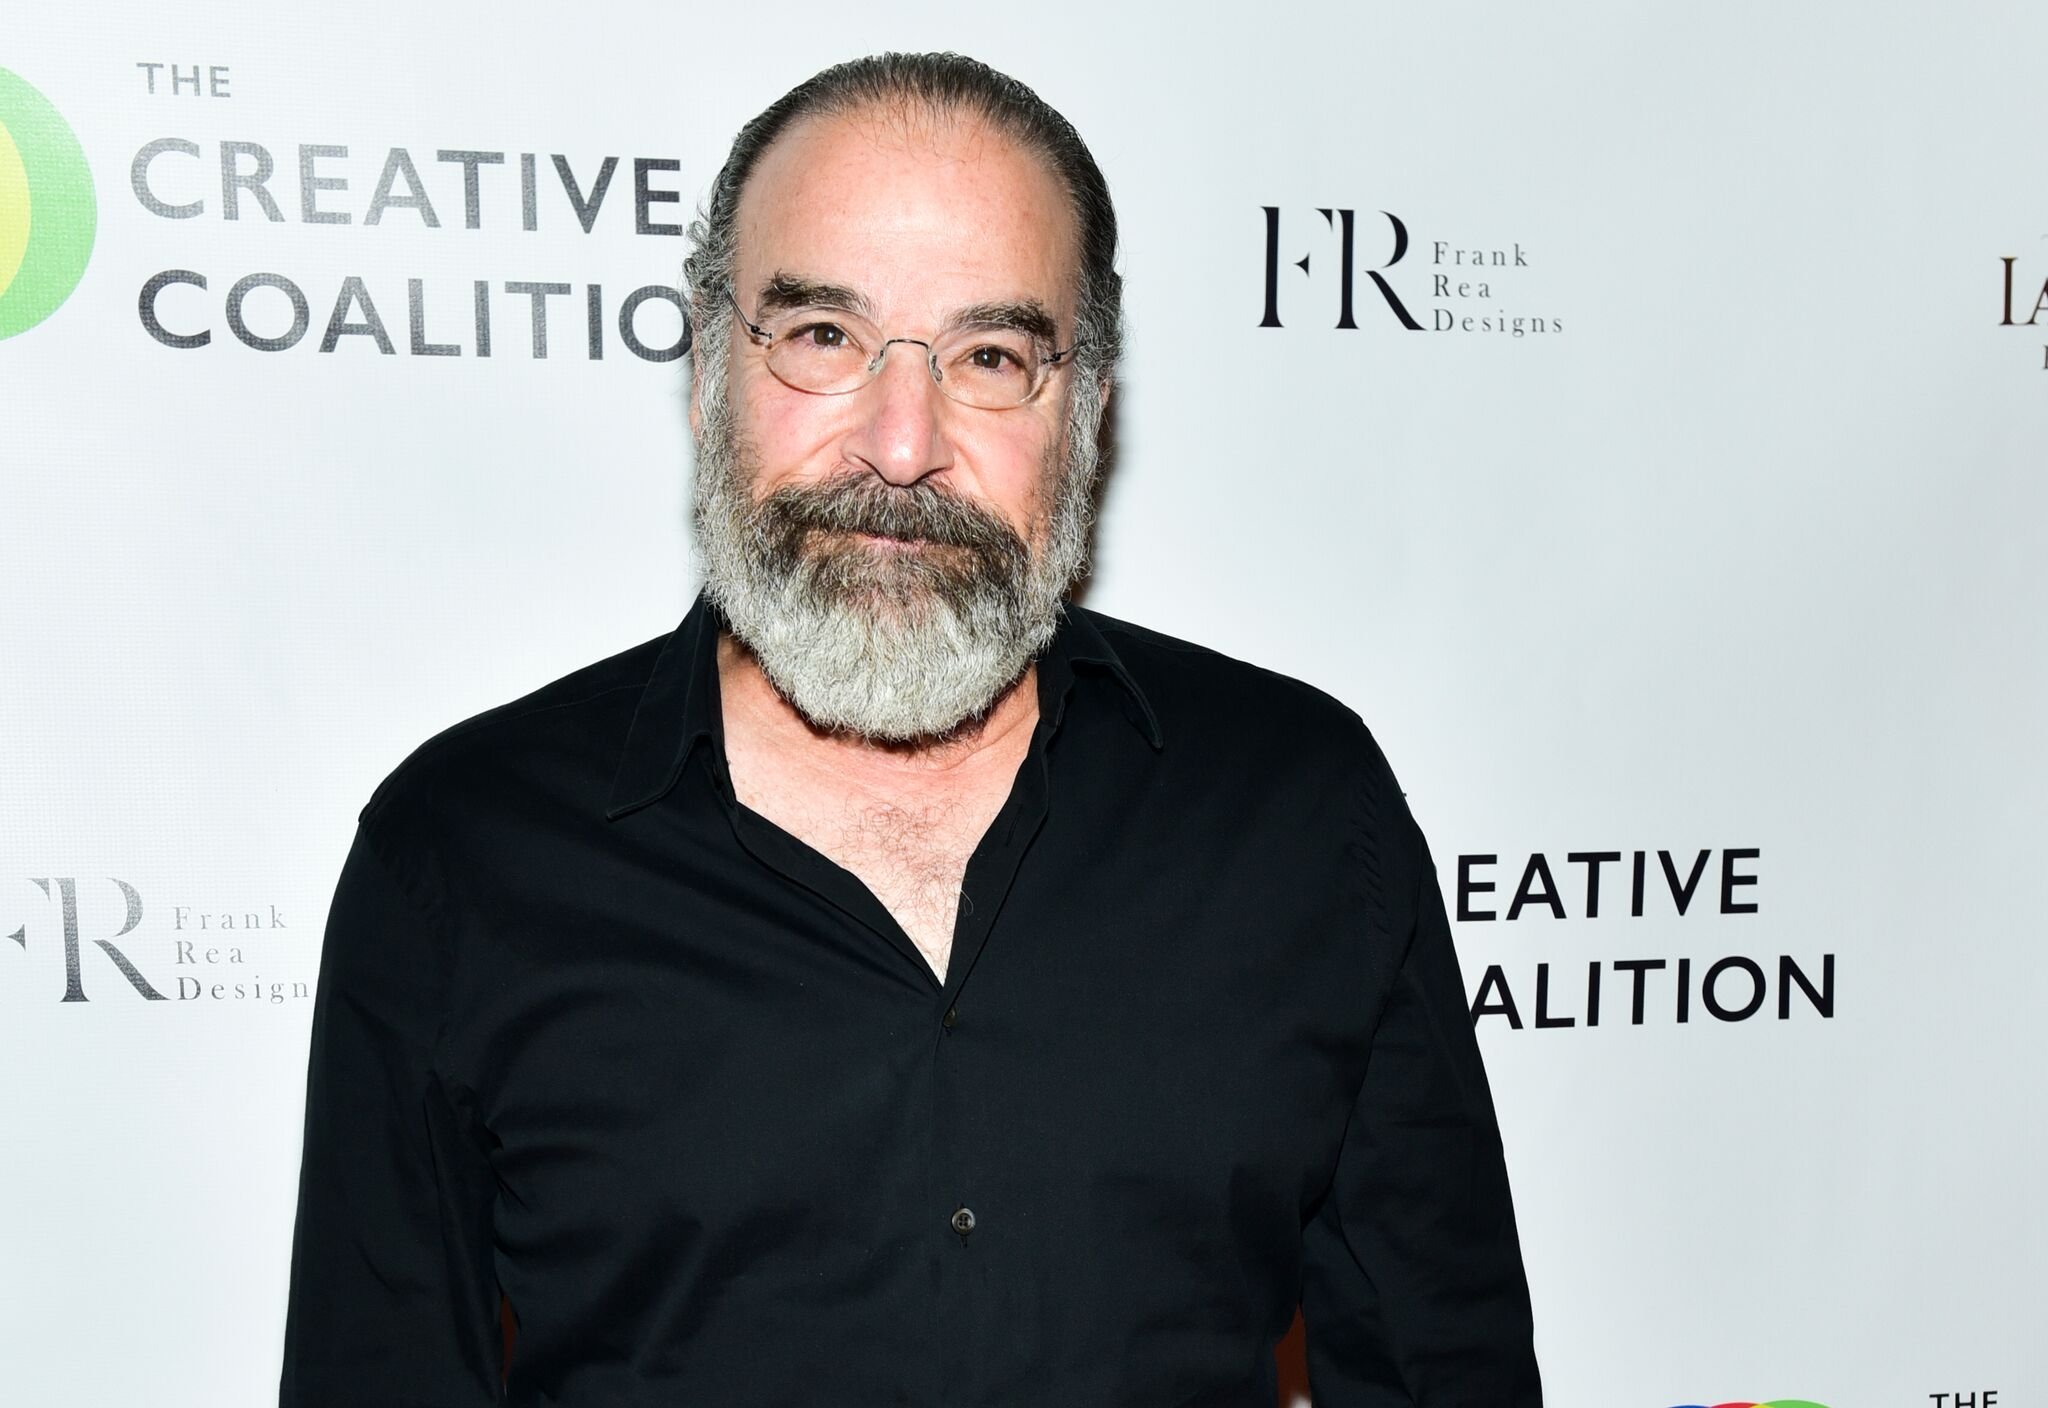  Mandy Patinkin attends the Creative Coalition 2018 Spotlight Initiative Gala Awards Dinner | Getty Images